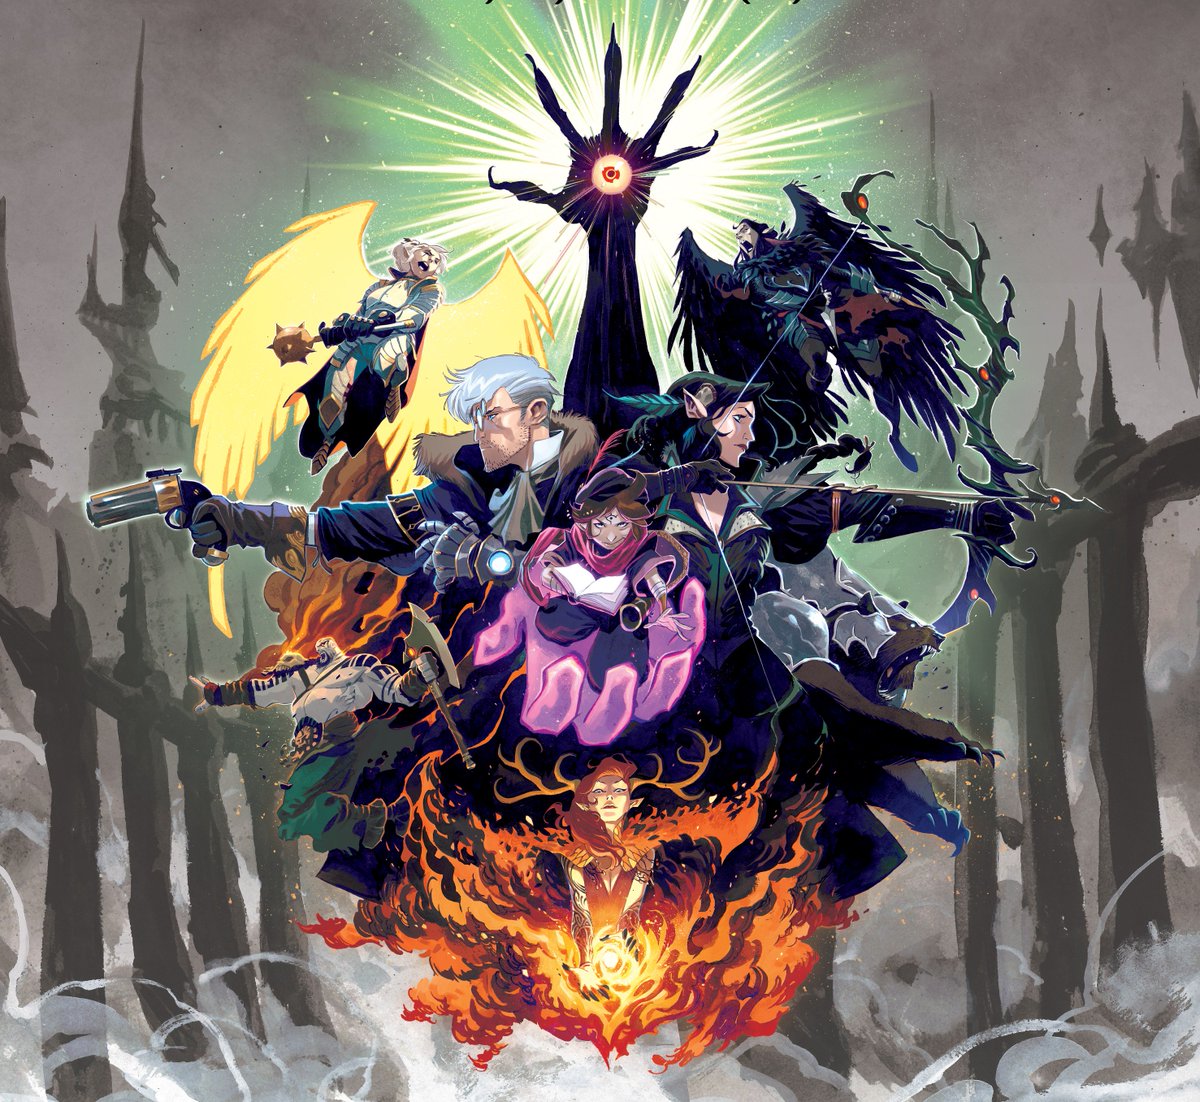 Critical Role closer look at our standard edition cover art, created & Moreno Denisio, for The Chronicles of Exandria II: The Legend of Vox Machina - our